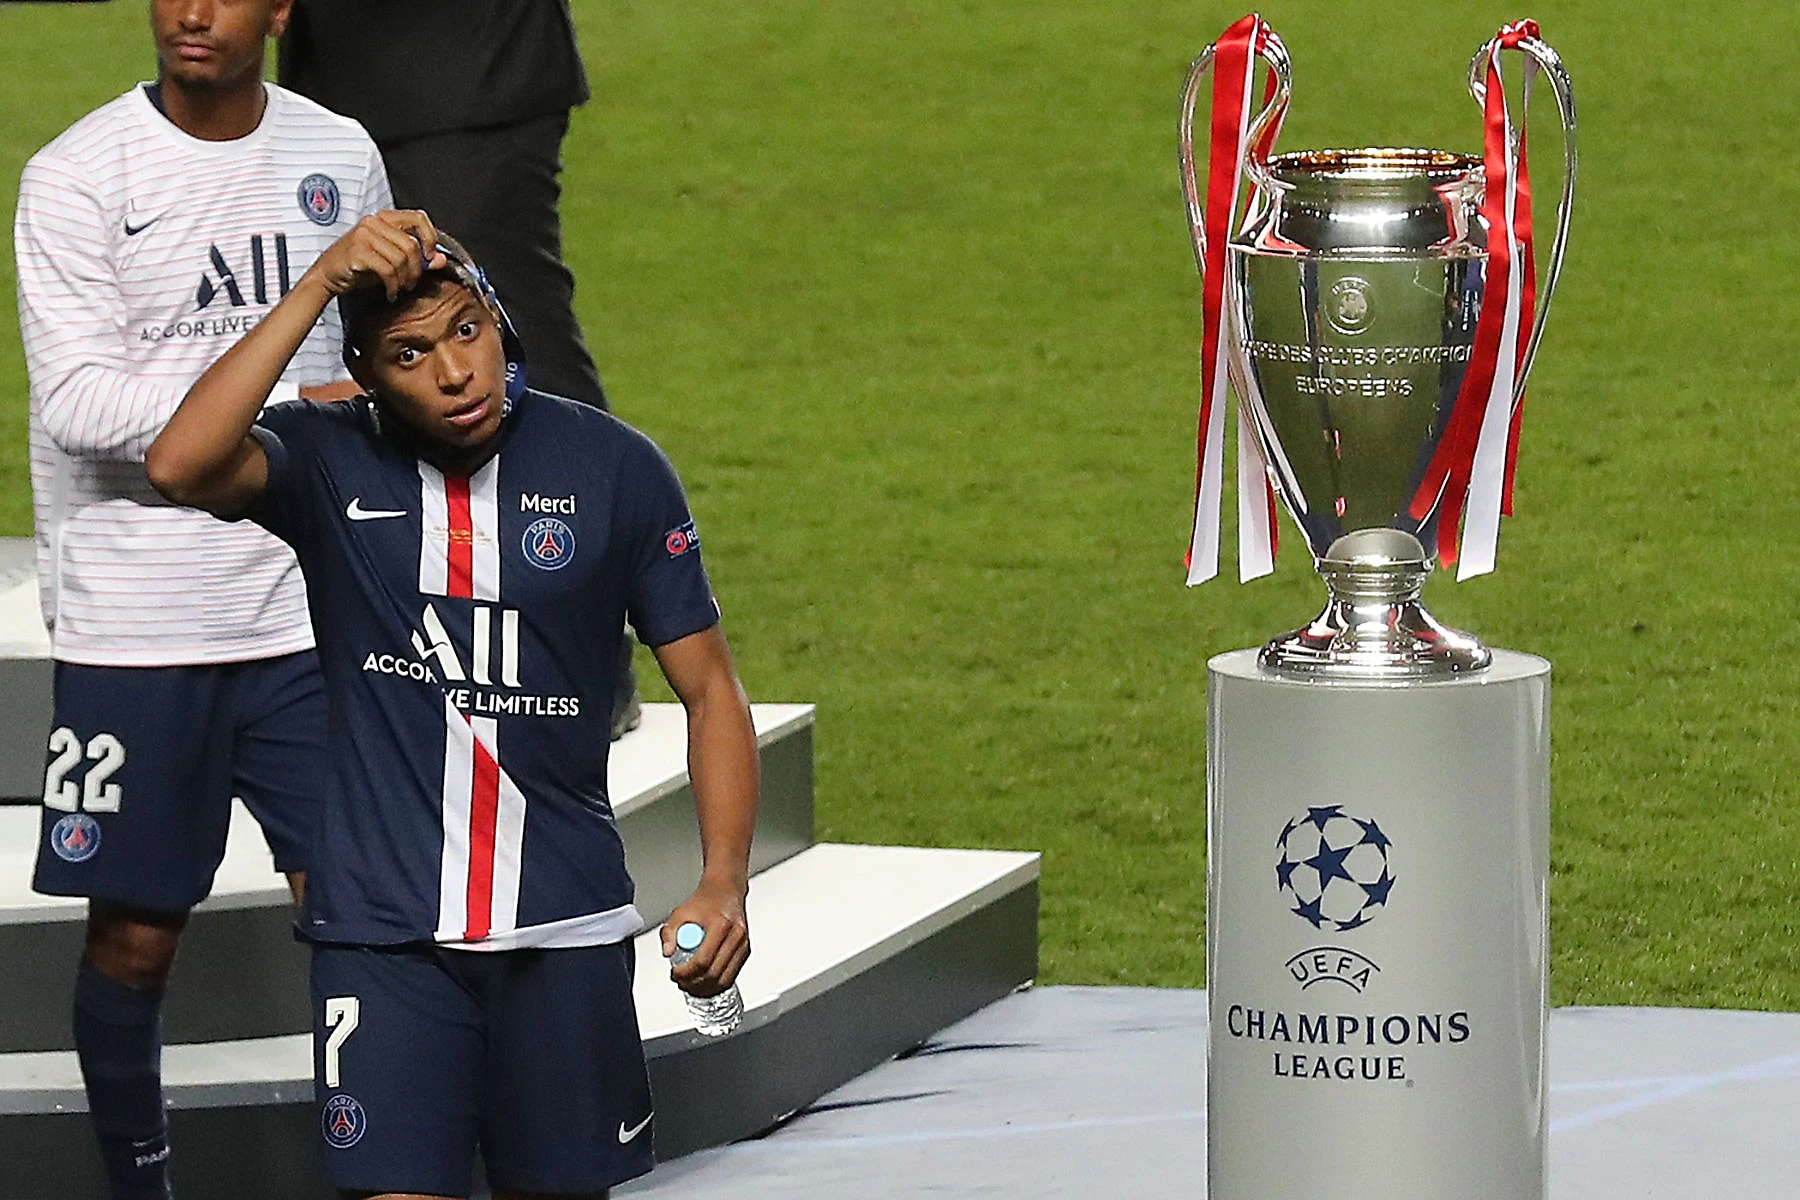 Kylian Mbappé Provides an Update on His Injured Ankle and Reflects on the  Champions League Final Loss – PSG Talk